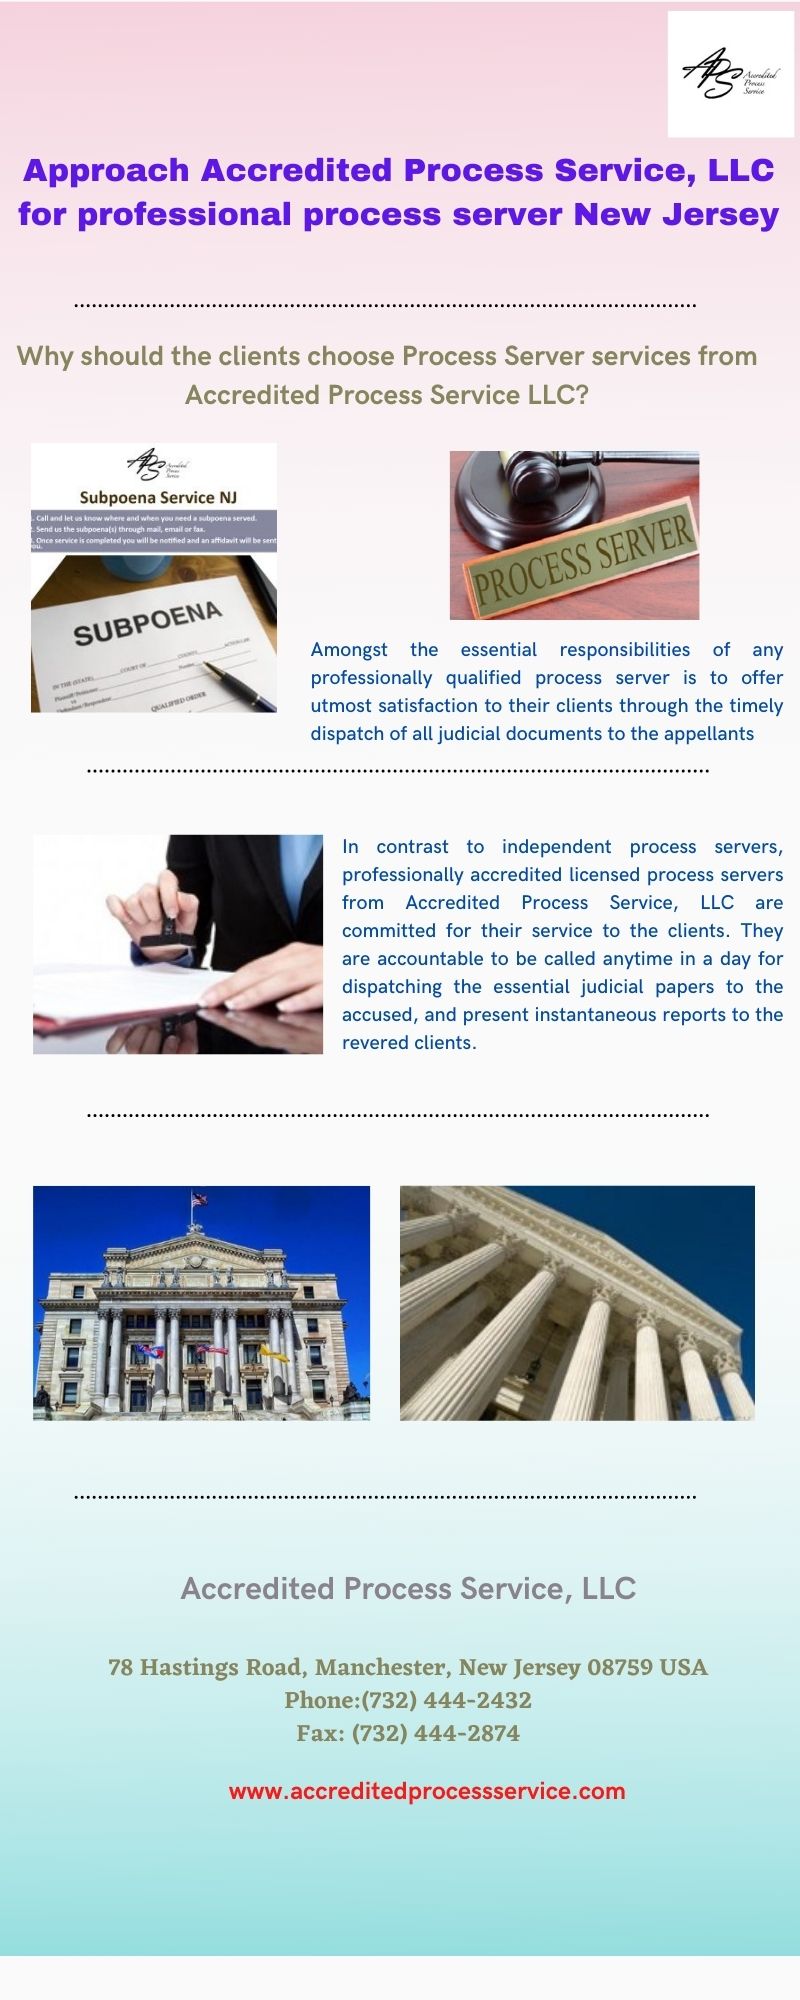 Approach Accredited Process Service, LLC for professional process server New Jersey Accredited Process Service, LLC brings in the judicially qualified dedicated and reliable process server New Jersey. Are you feeling curious? Then visit to avail the genuine service.For more details, visit: http://www.accreditedprocessservice.com/ by Accreditedprocess